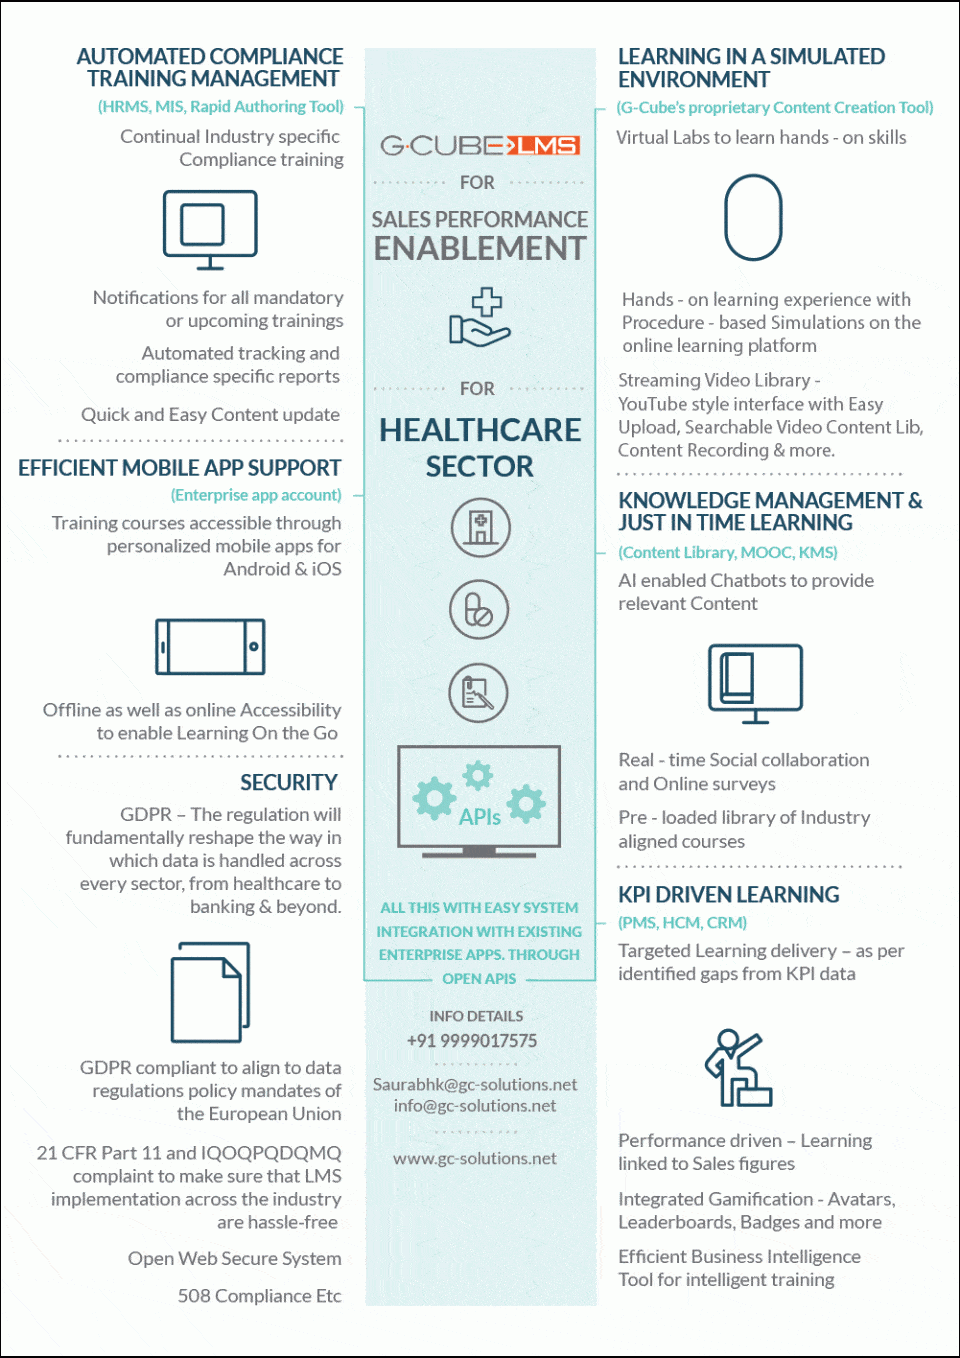 Key Features of G-Cube LMS to Serve Your Healthcare Training Needs – Infographic